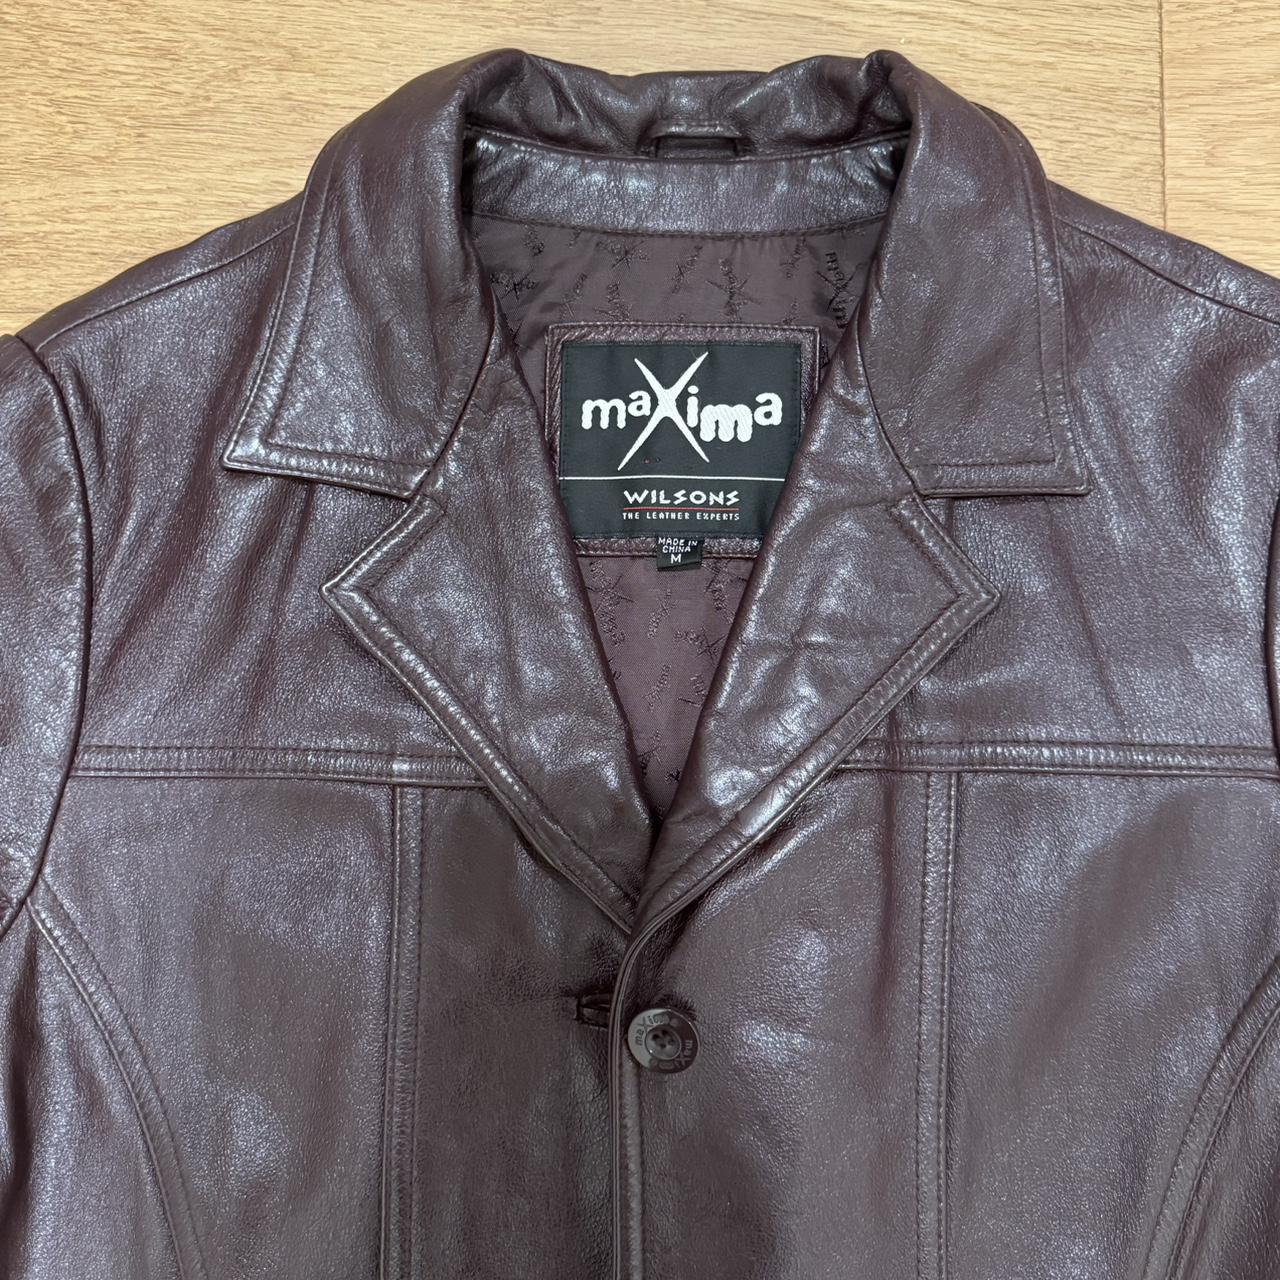 Wilson’s Leather Women's Brown and Burgundy Jacket (2)